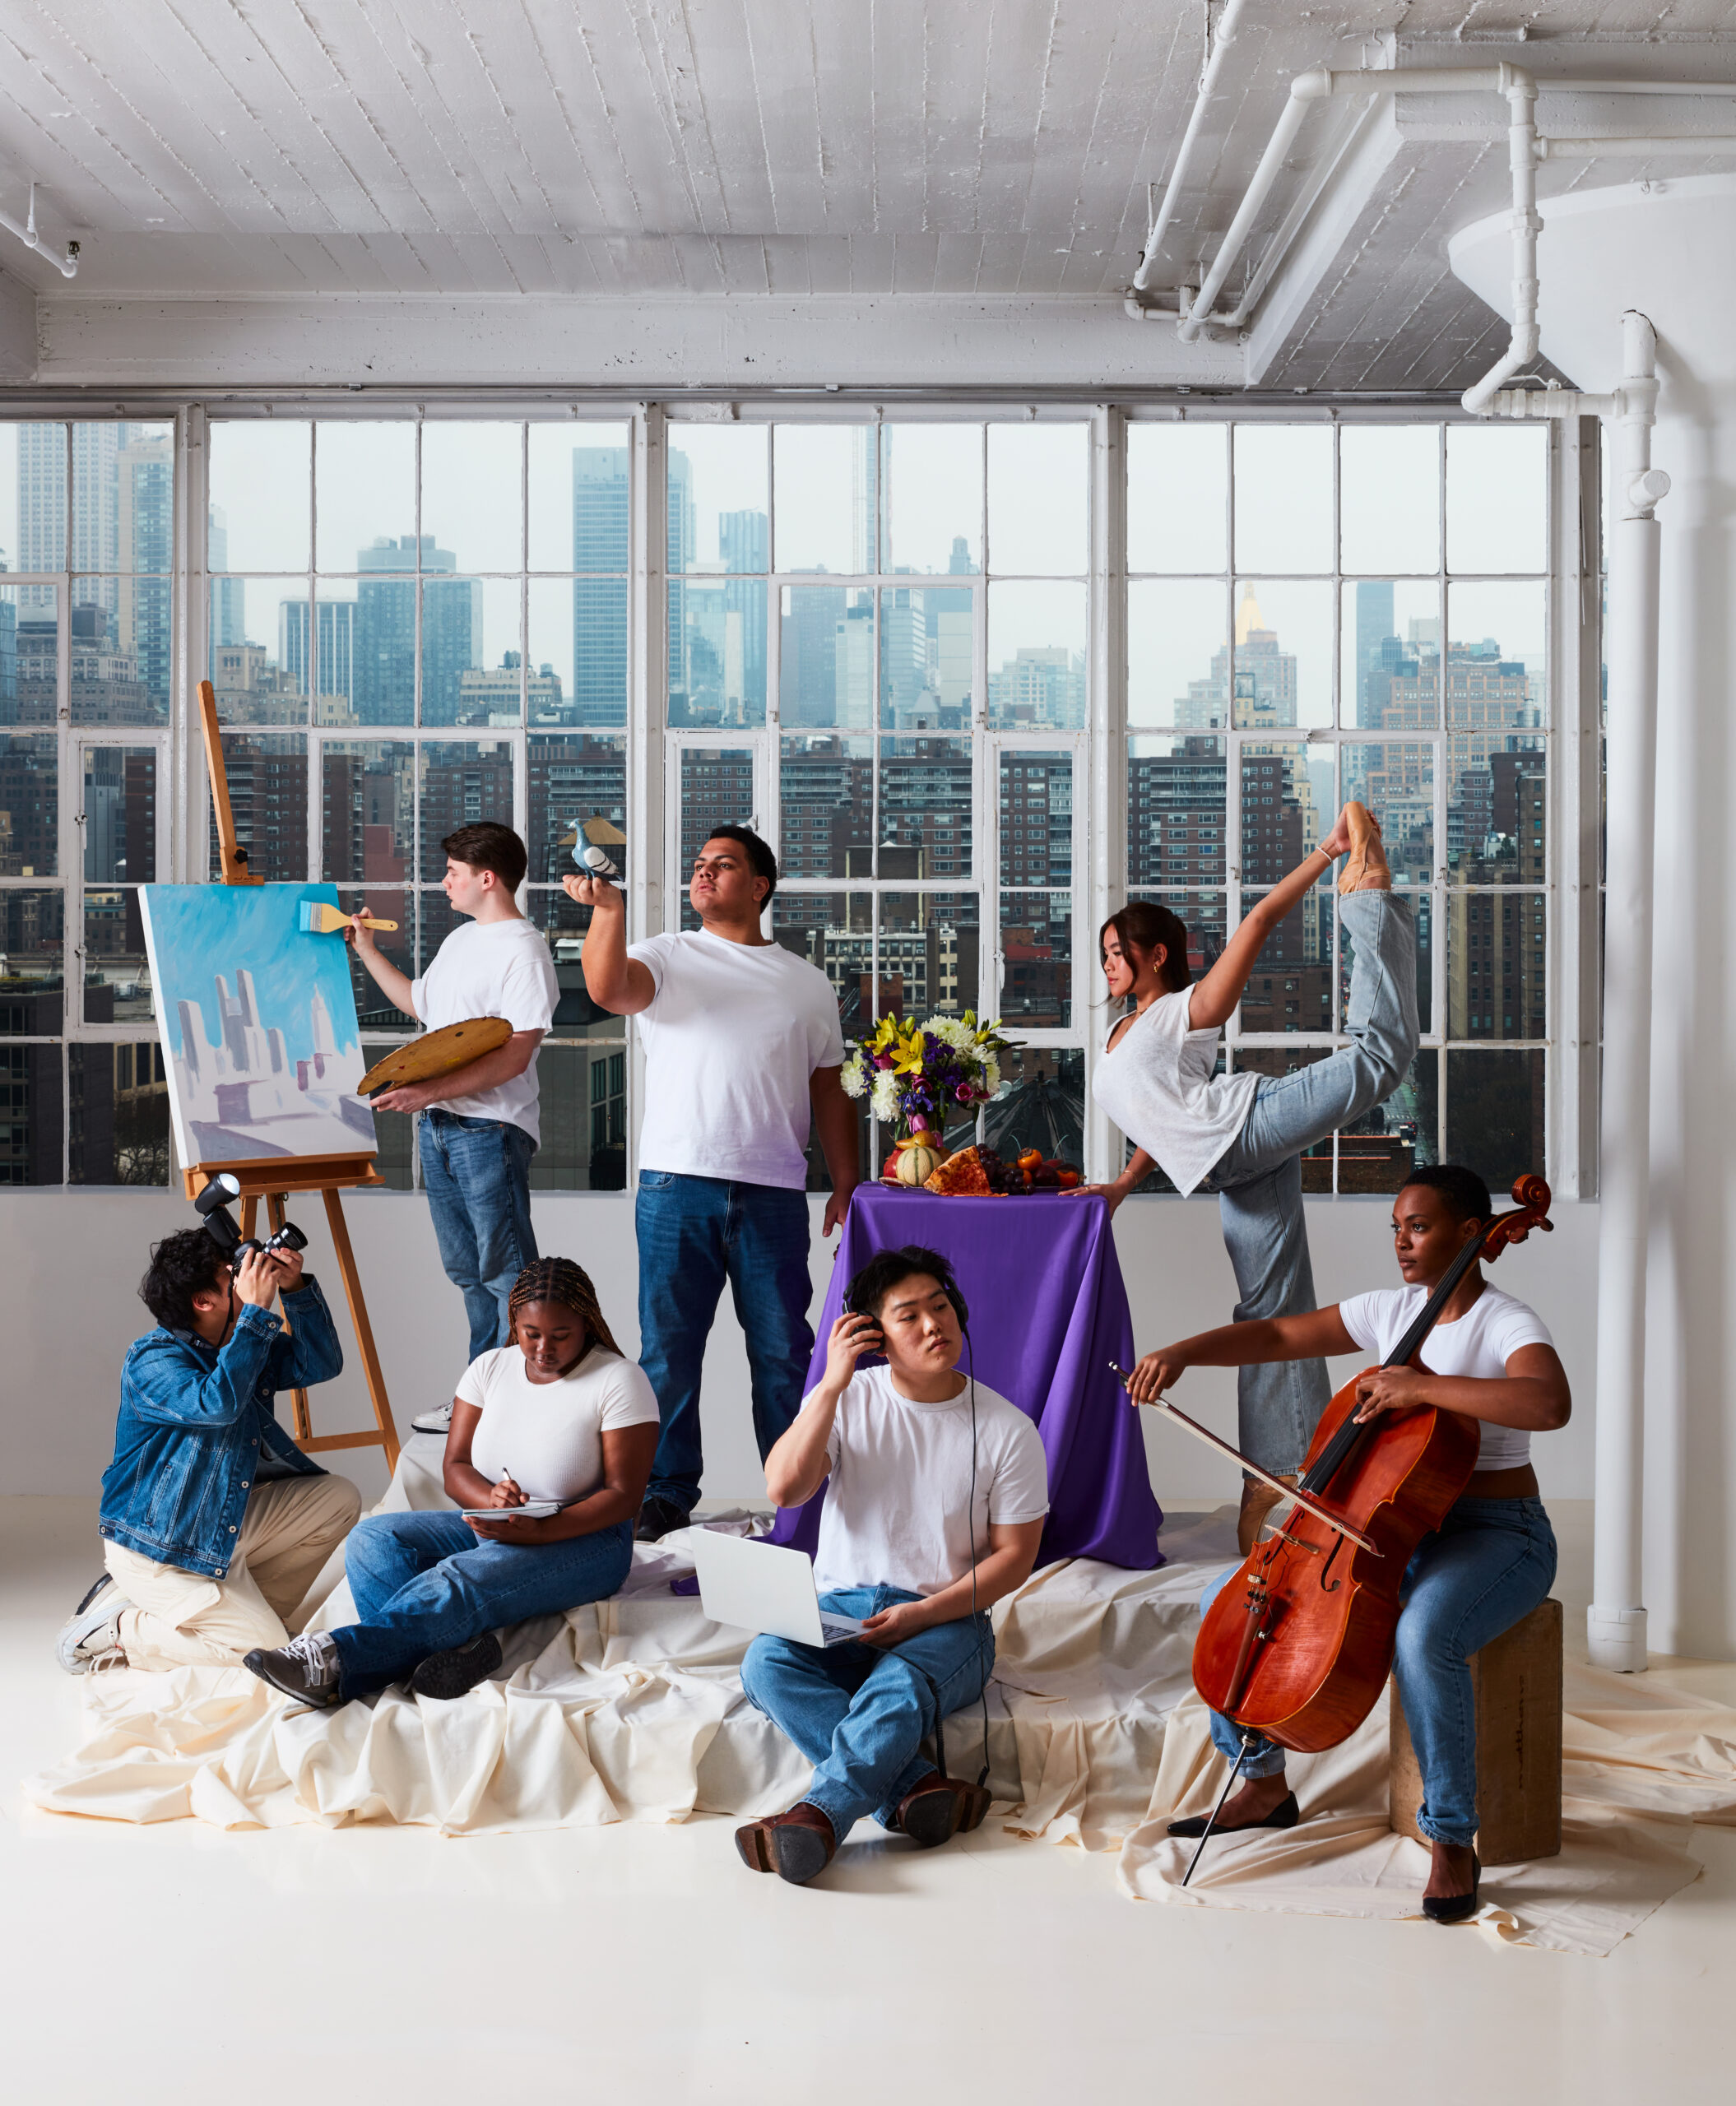 A diverse group of seven people, dressed casually in white t-shirts and jeans, engage in various artistic activities such as painting, photography, writing, music, and dance in a bright studio with large windows overlooking a cityscape.